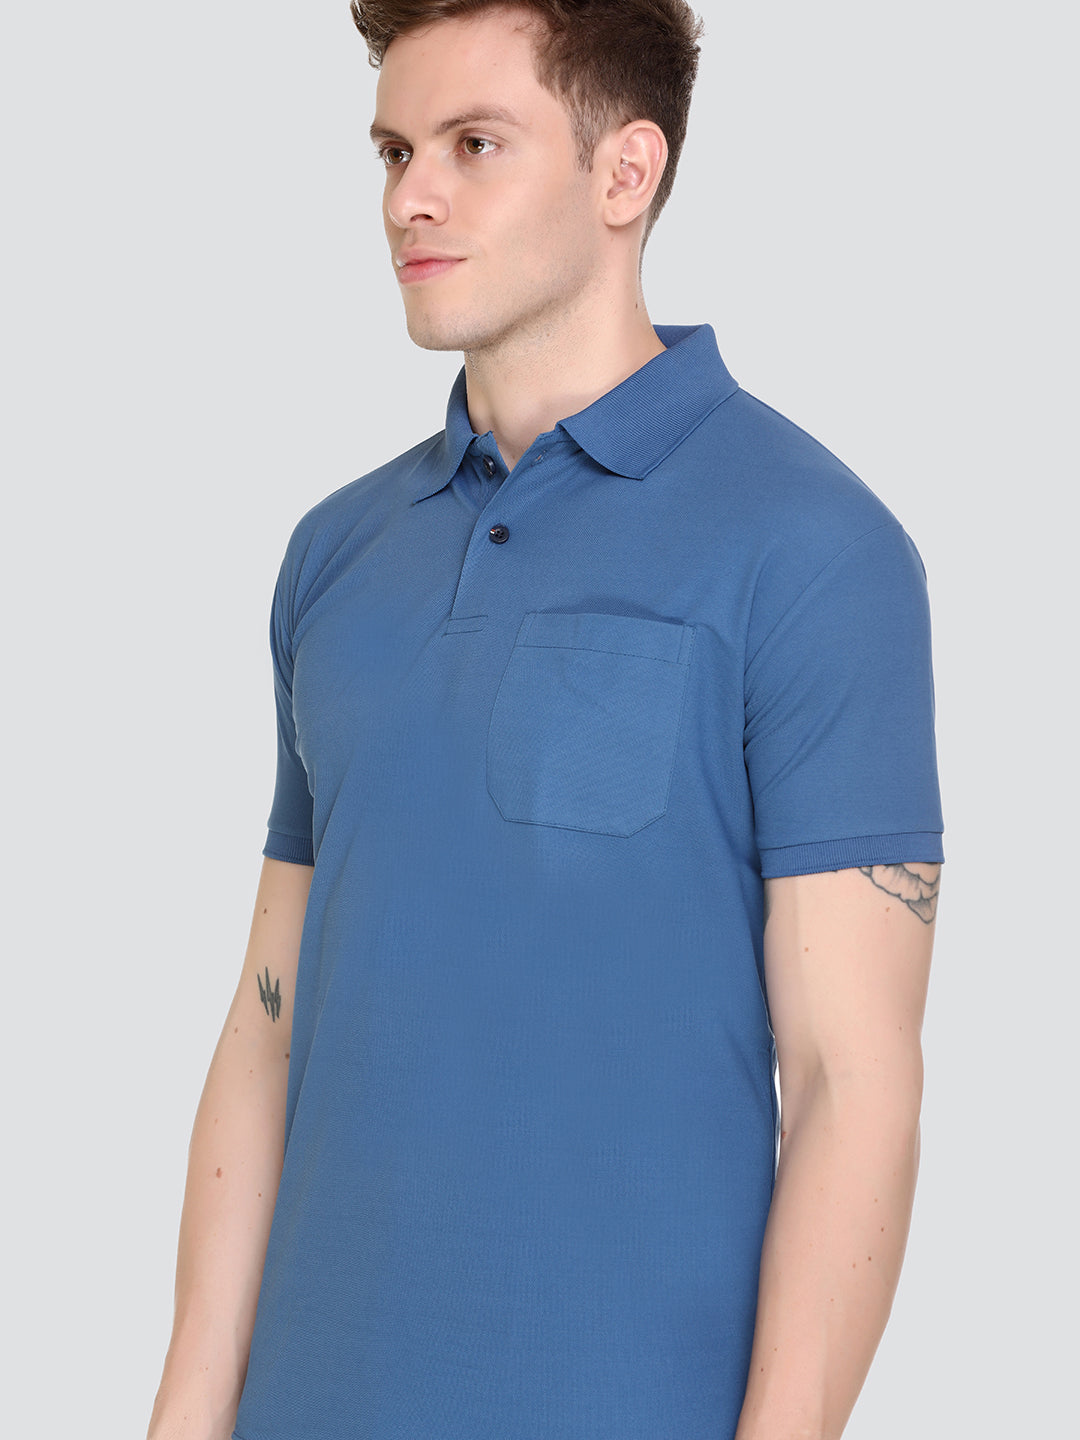 Comfortable Jinxer Blue Dry Fit Polo Neck T Shirt for men online in India